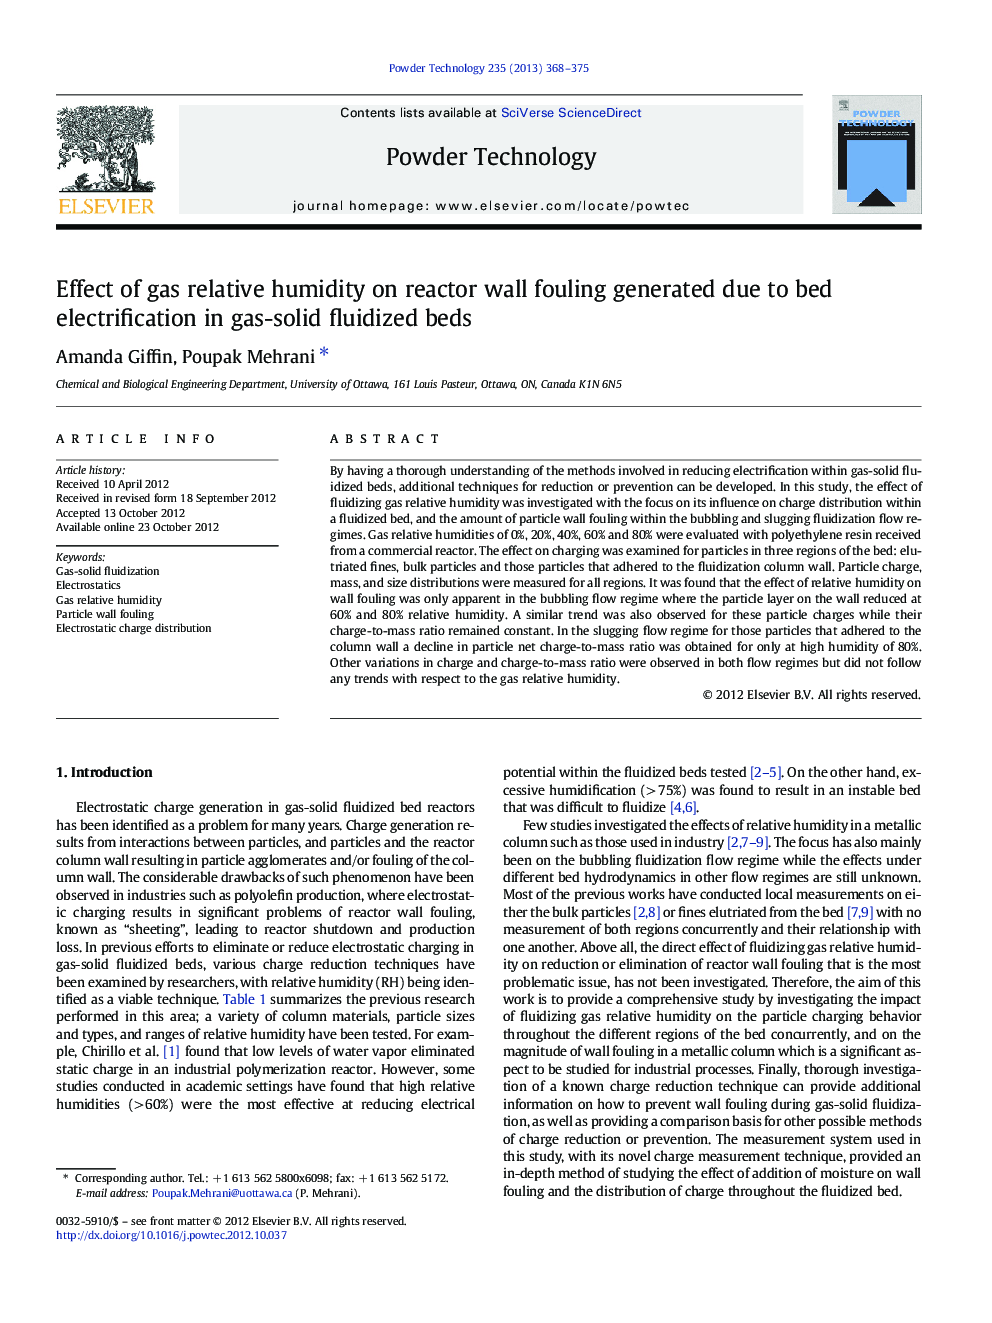 Effect of gas relative humidity on reactor wall fouling generated due to bed electrification in gas-solid fluidized beds